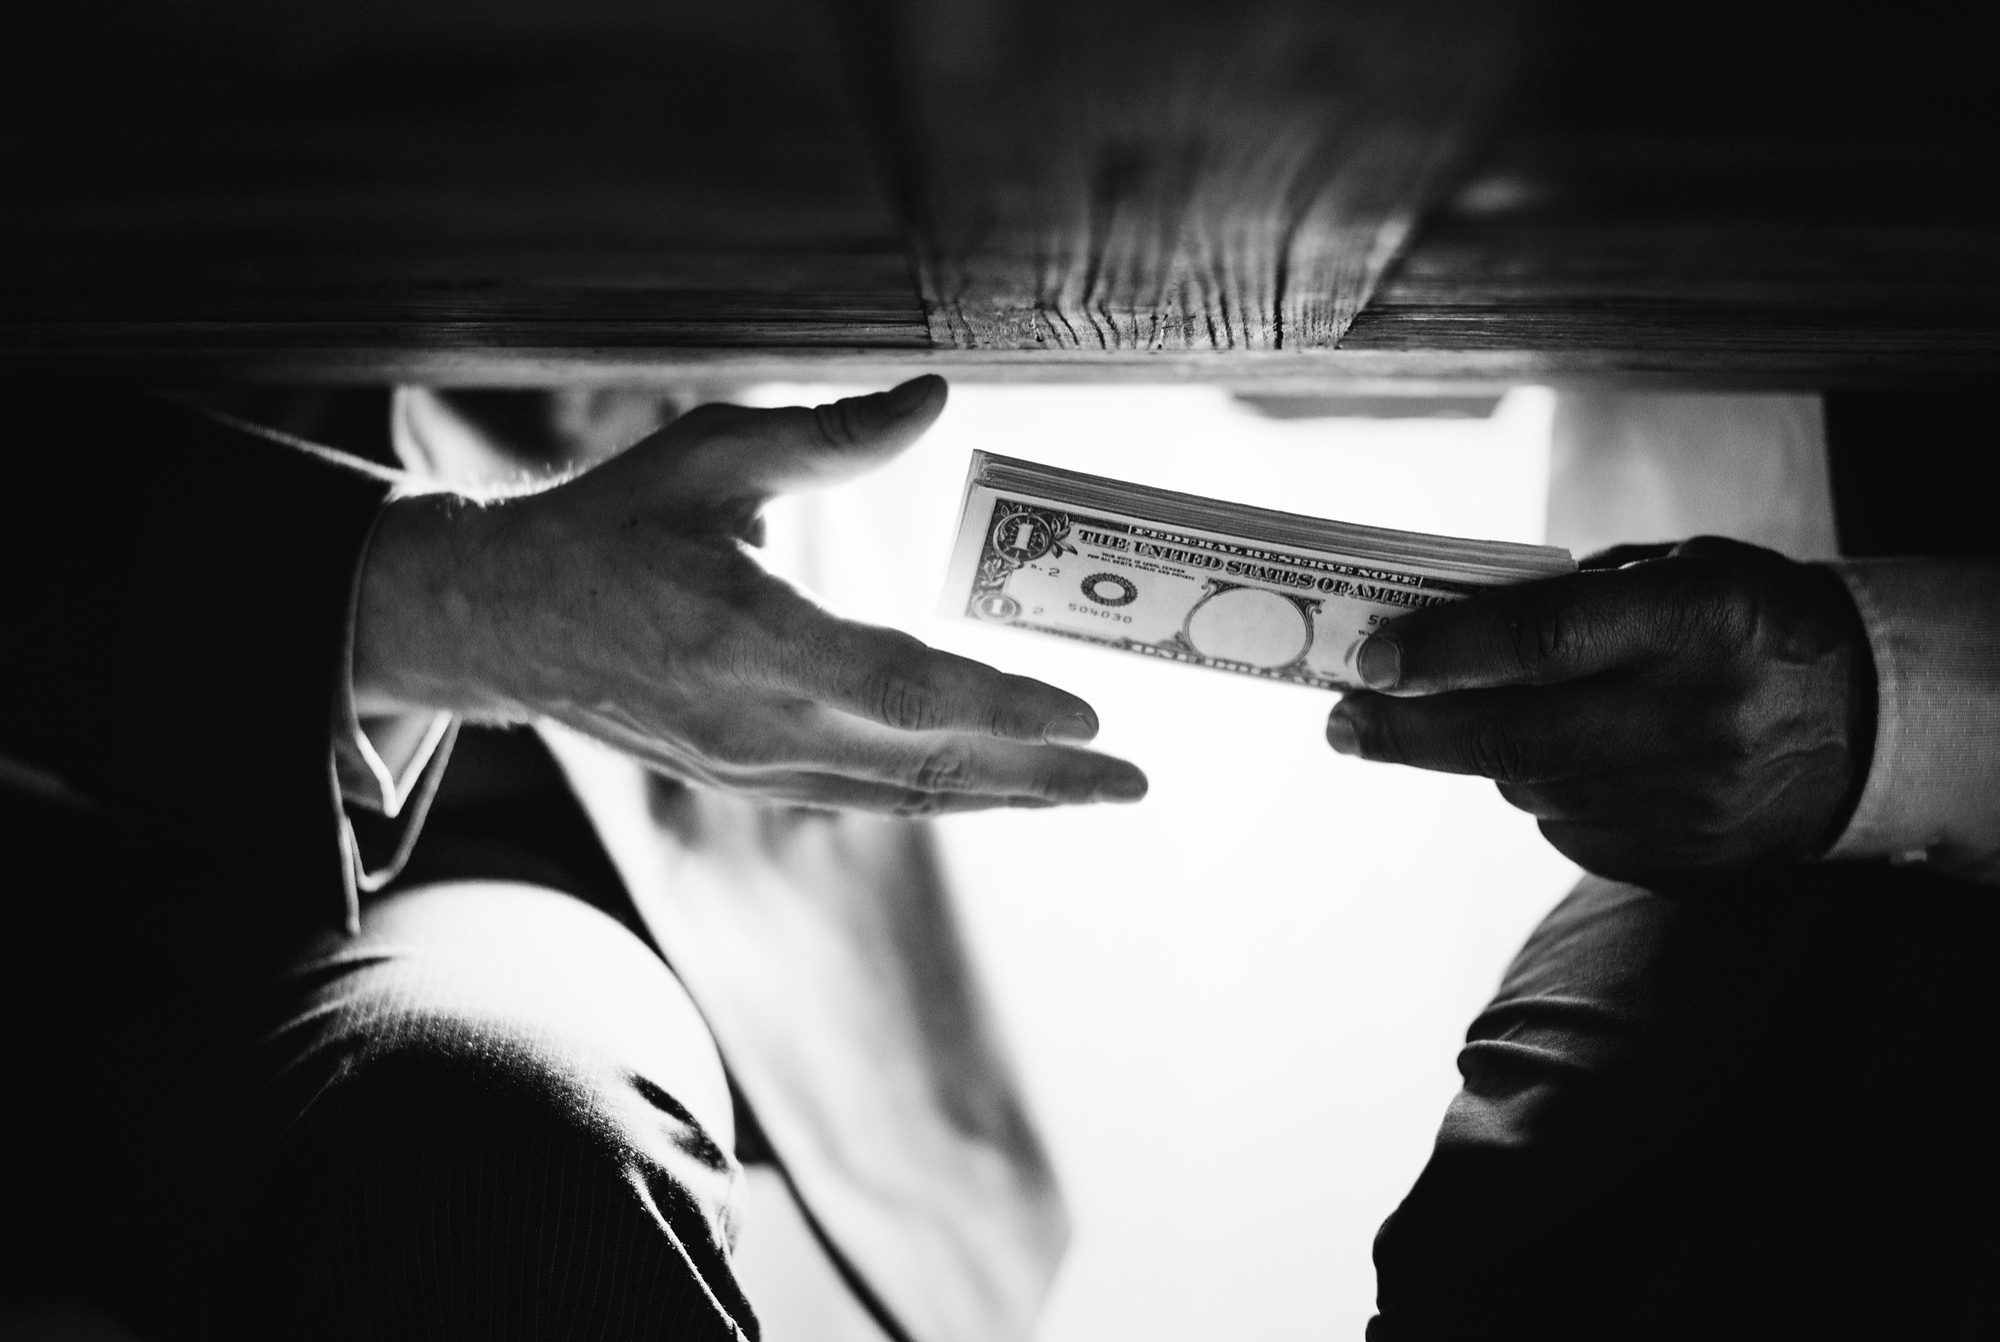 passing money under the table as bribe, an example or white-collar crime